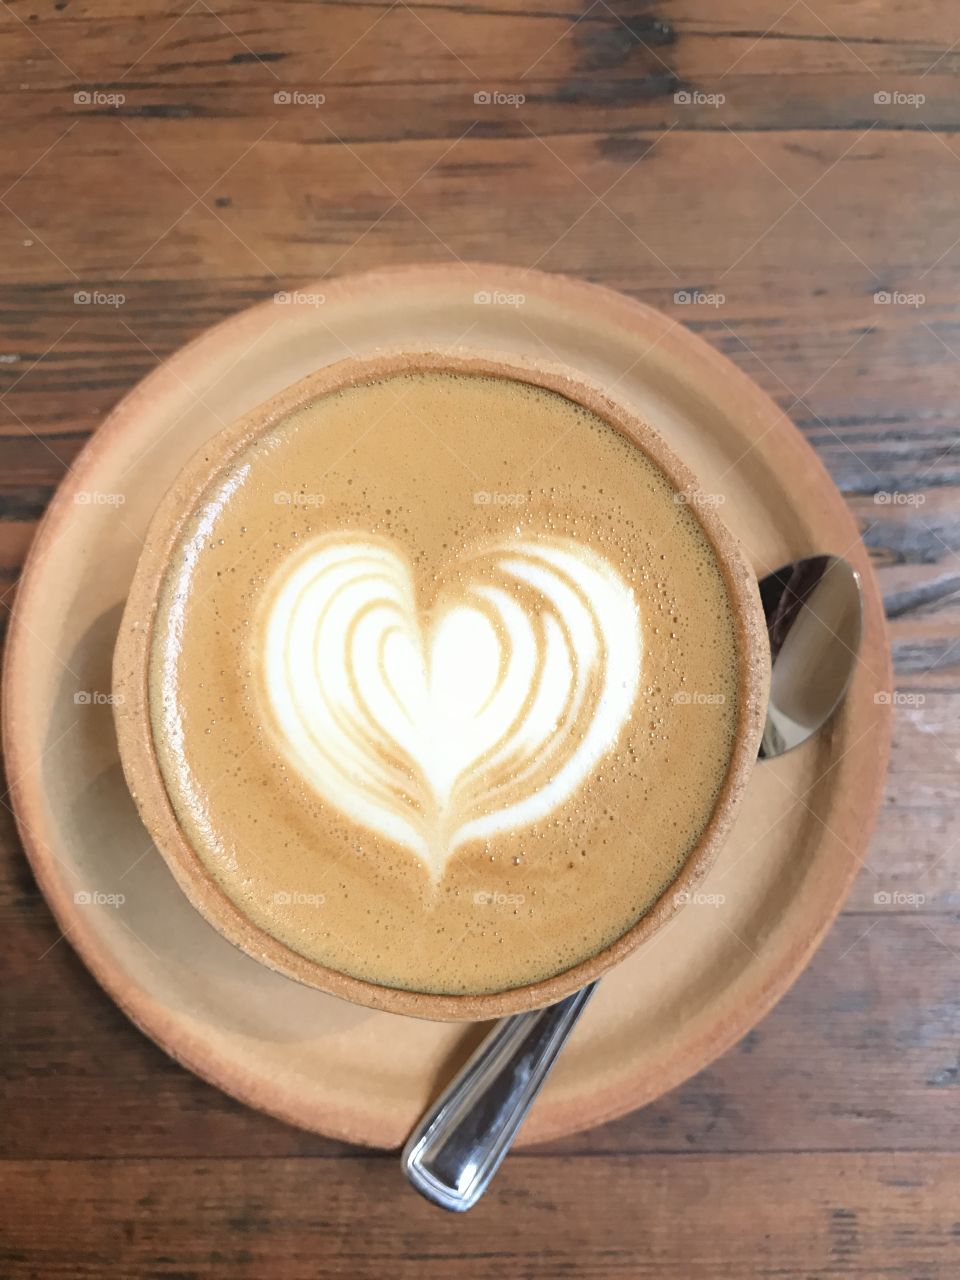 Overhead view of a mug of cappuccino with a foam heart on it.